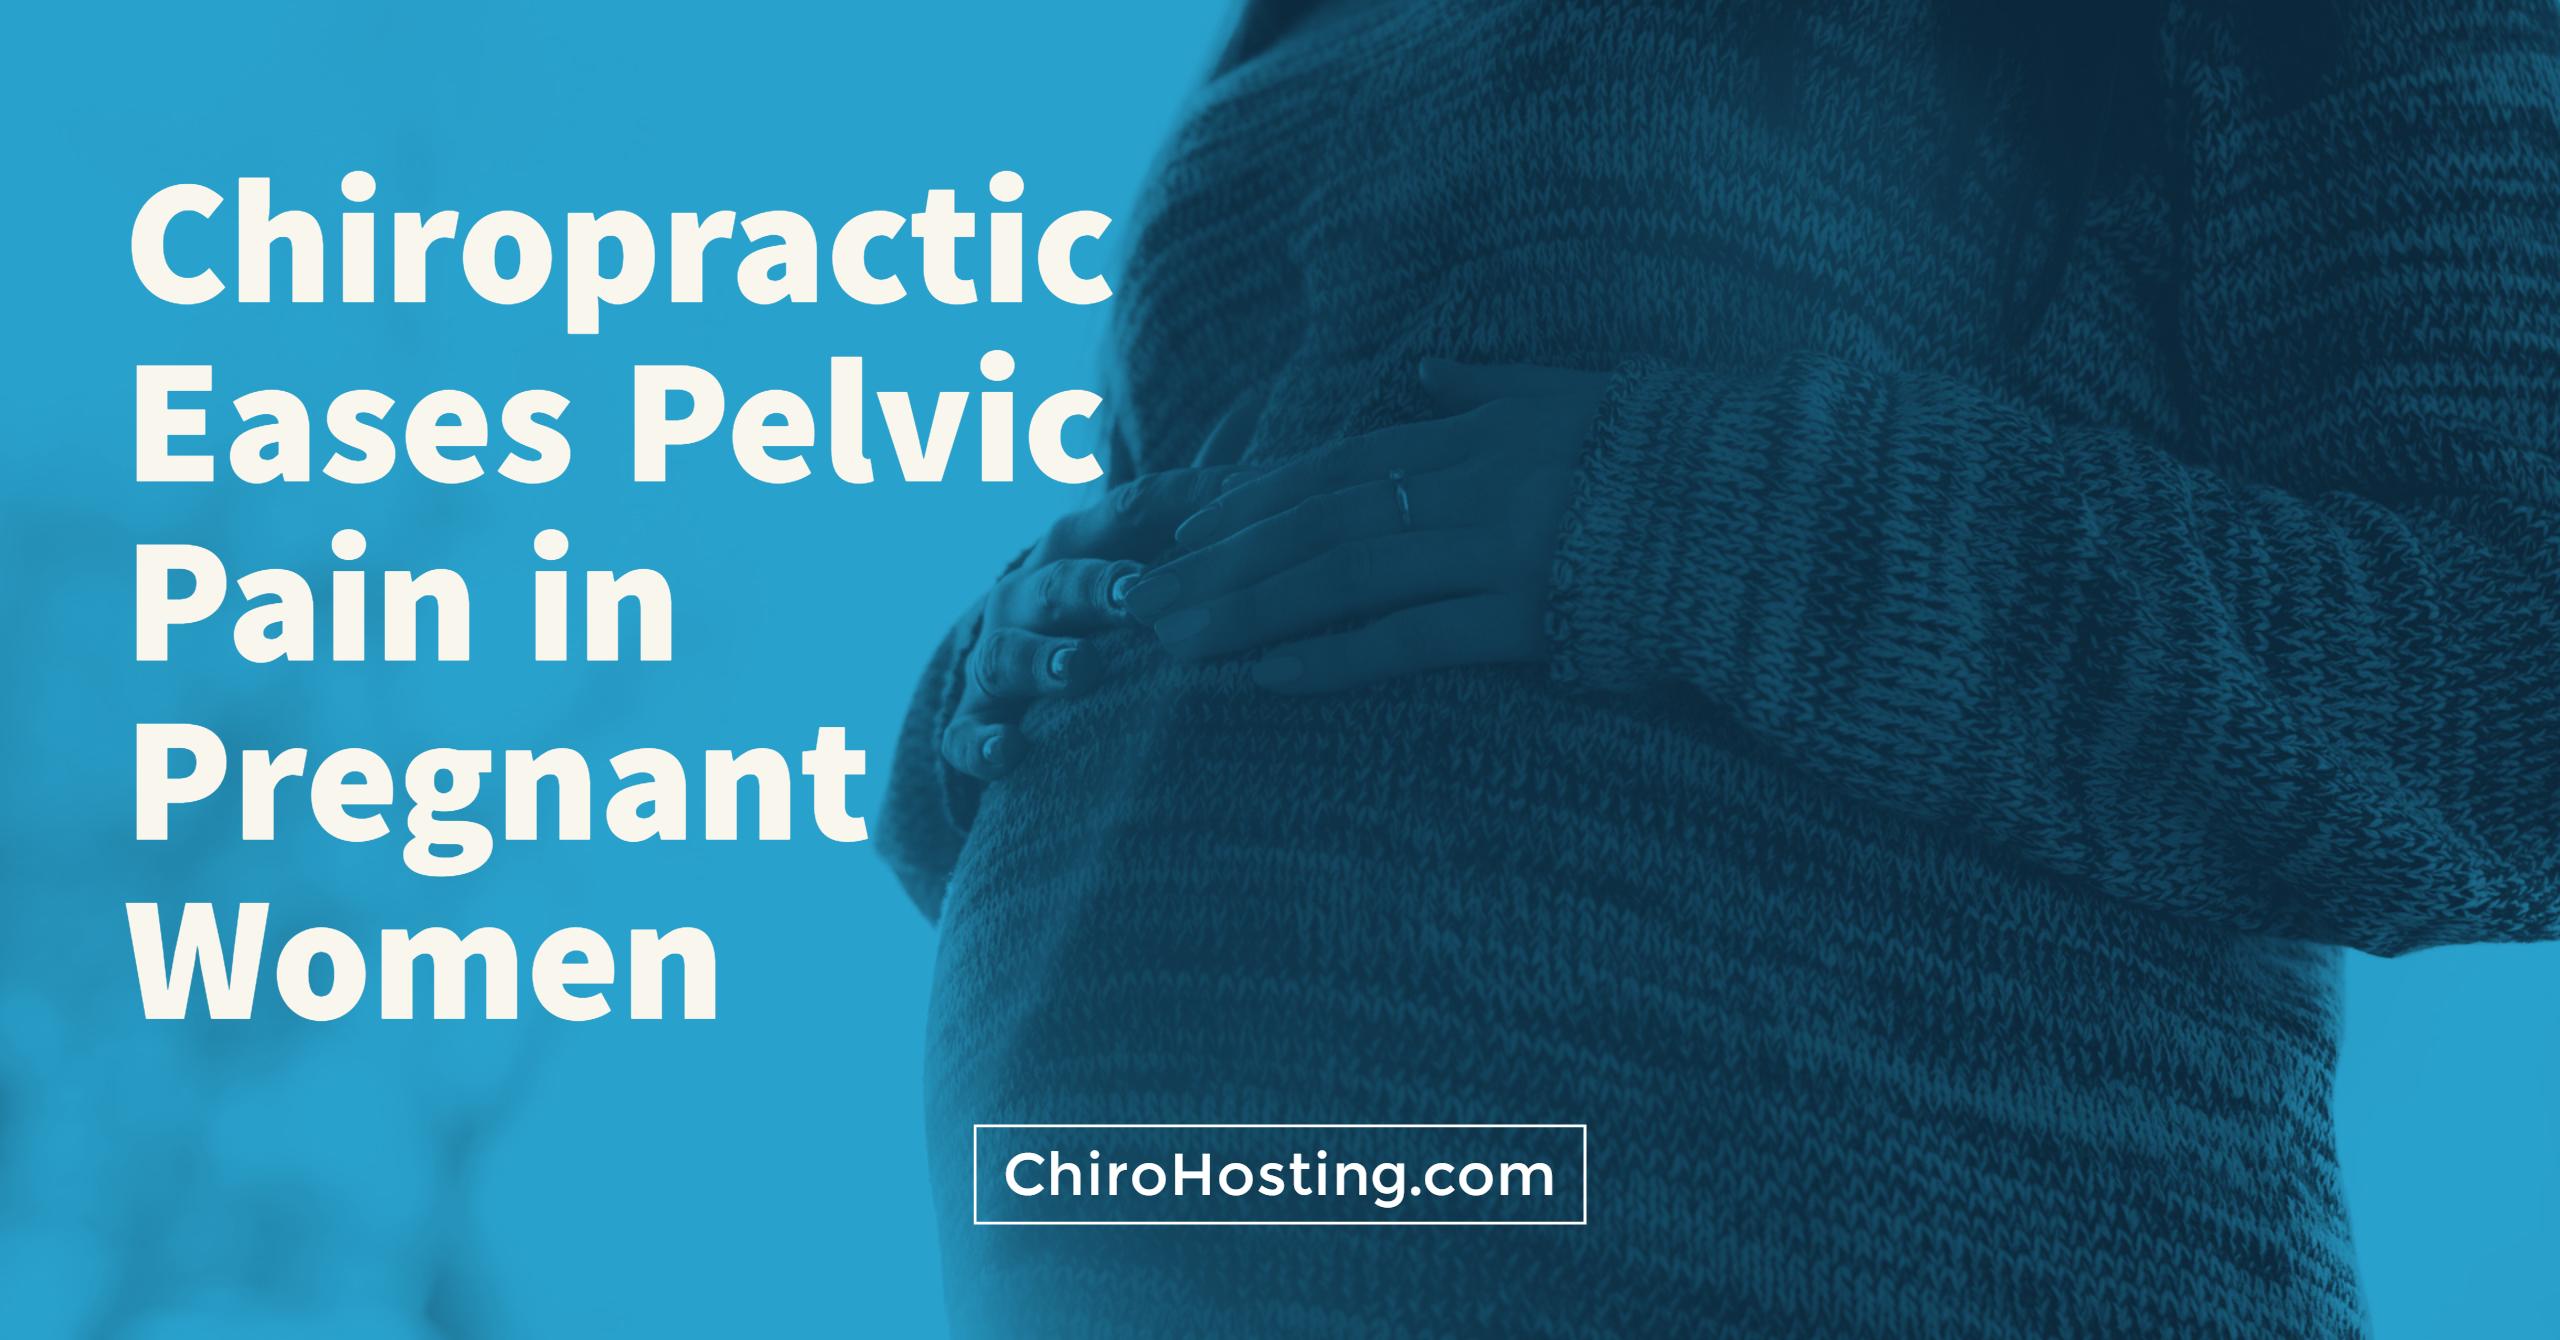 Chiropractic Eases Pelvic Pain in Pregnant Women